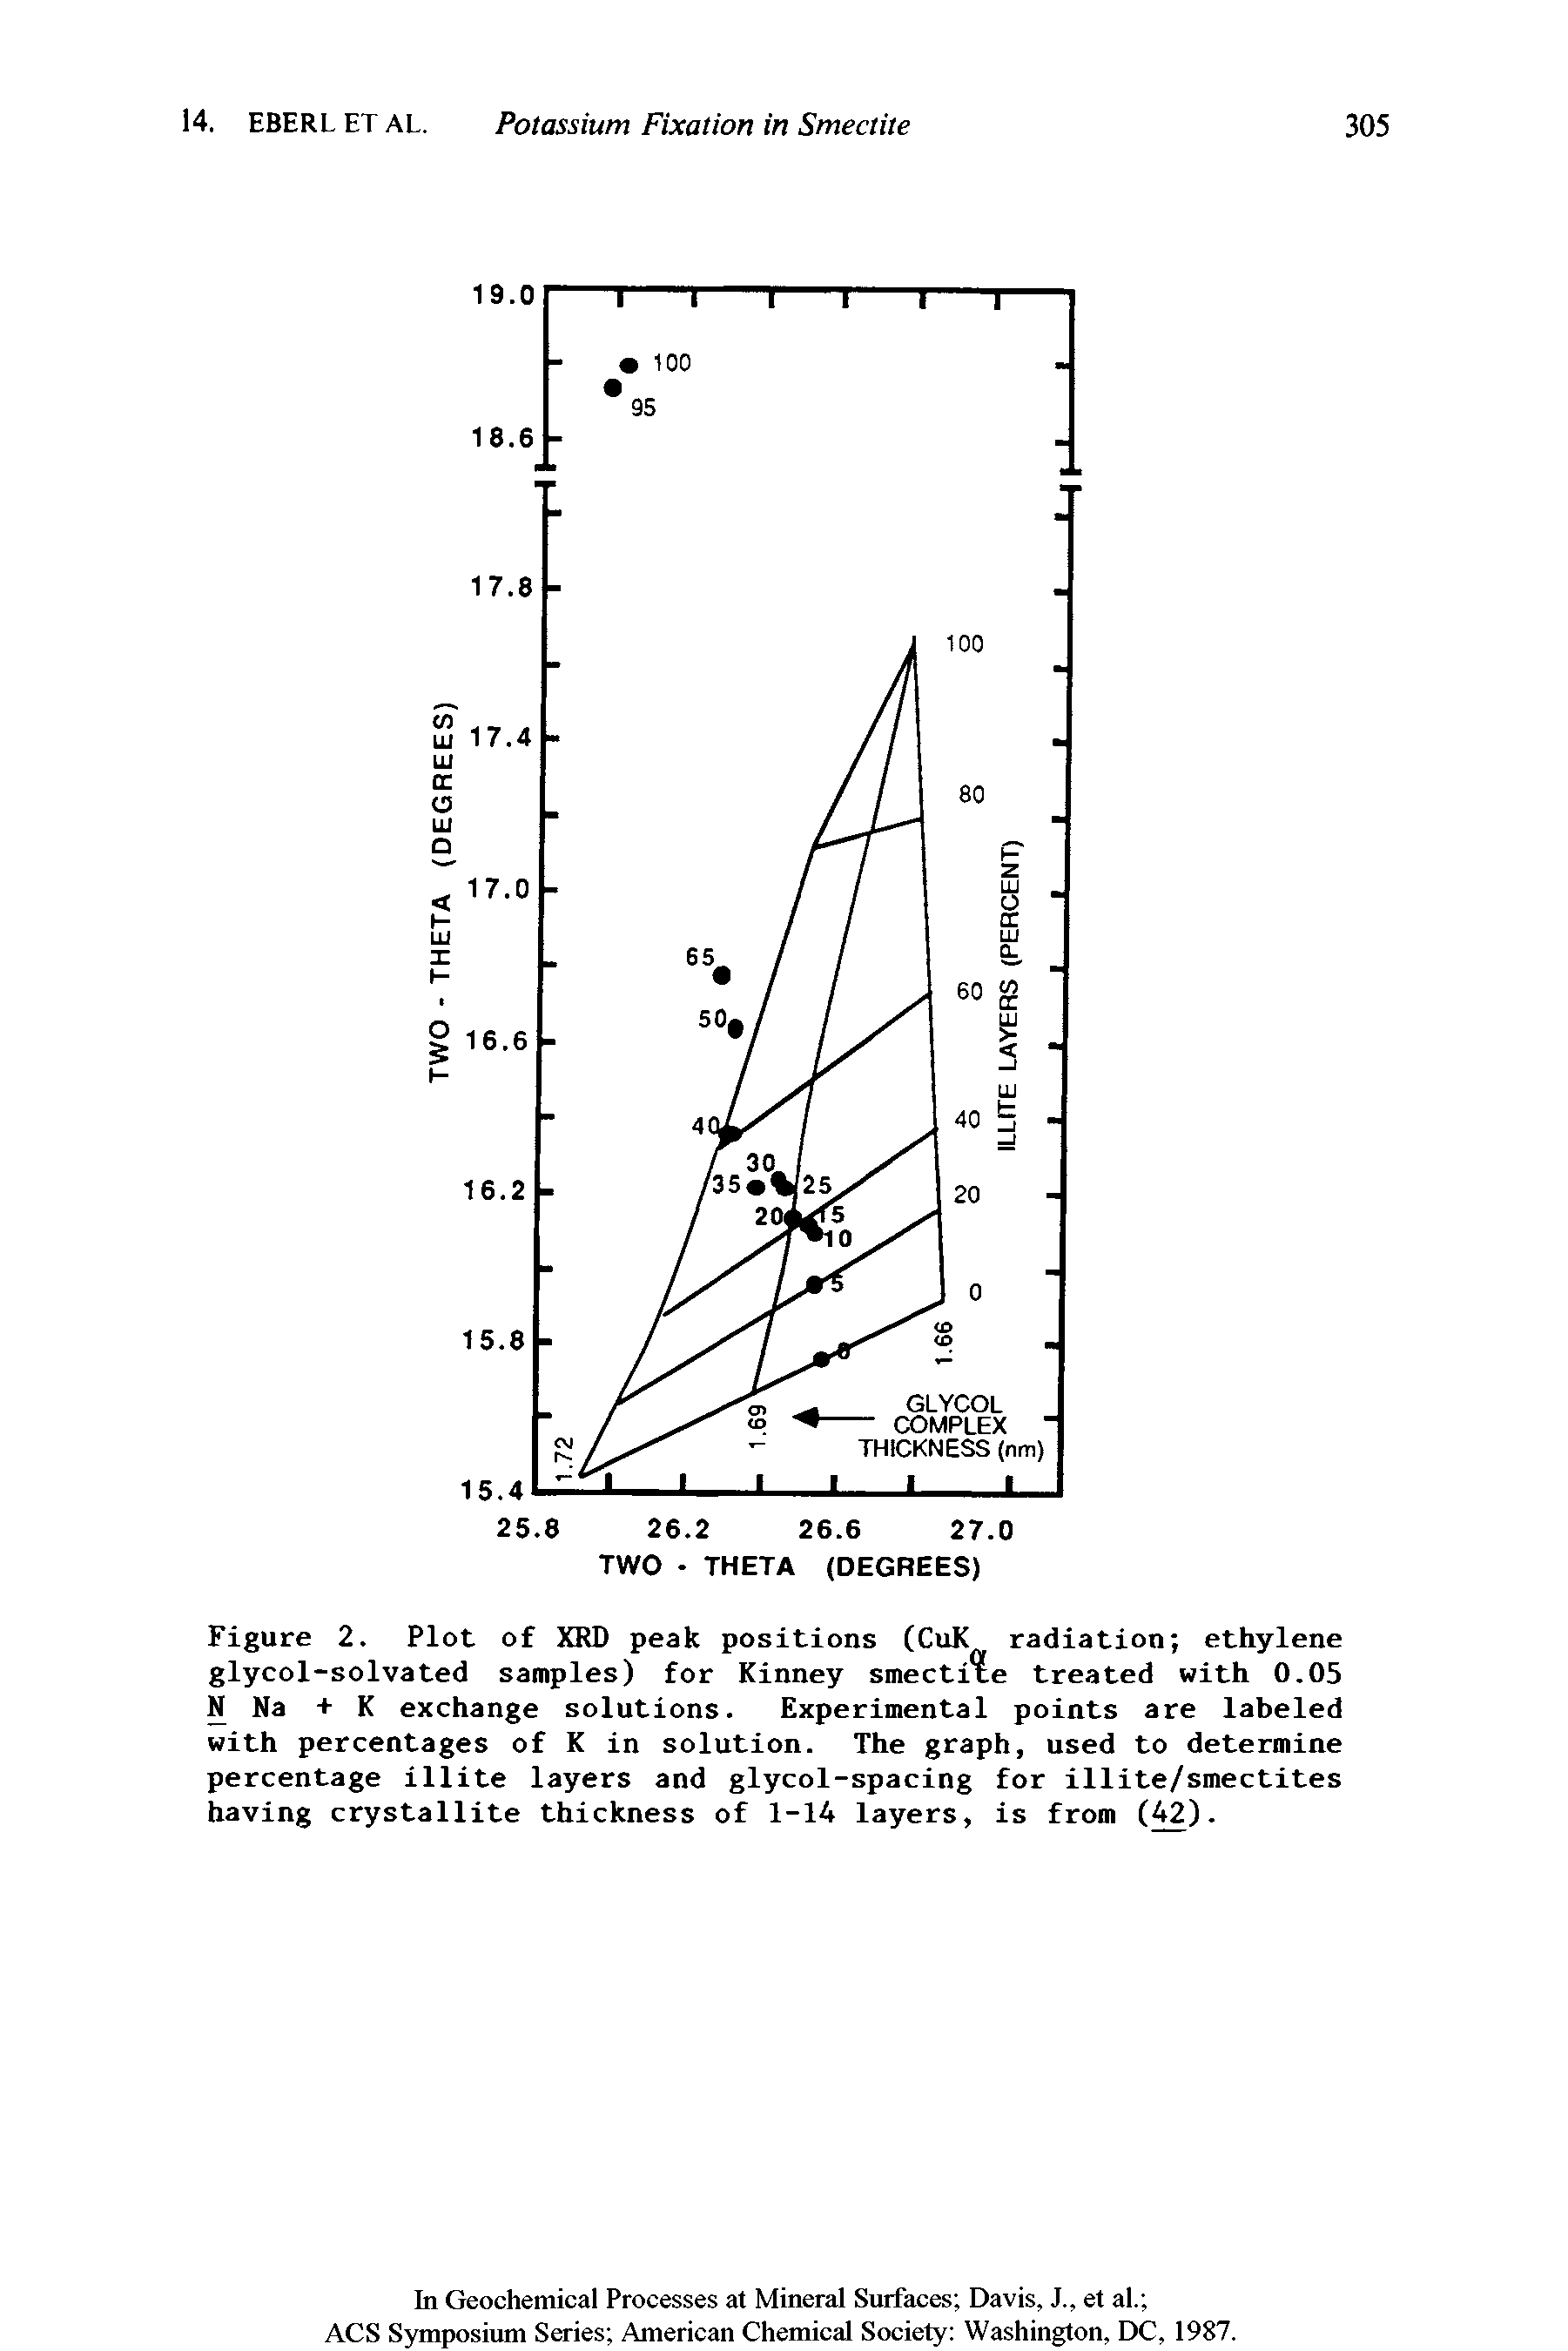 Figure 2. Plot of XRD peak positions (CuK radiation ethylene glycol-solvated samples) for Kinney smectite treated with 0.05 N Na + K exchange solutions. Experimental points are labeled with percentages of K in solution. The graph, used to determine percentage illite layers and glycol-spacing for illite/smectites having crystallite thickness of 1-14 layers, is from (42).